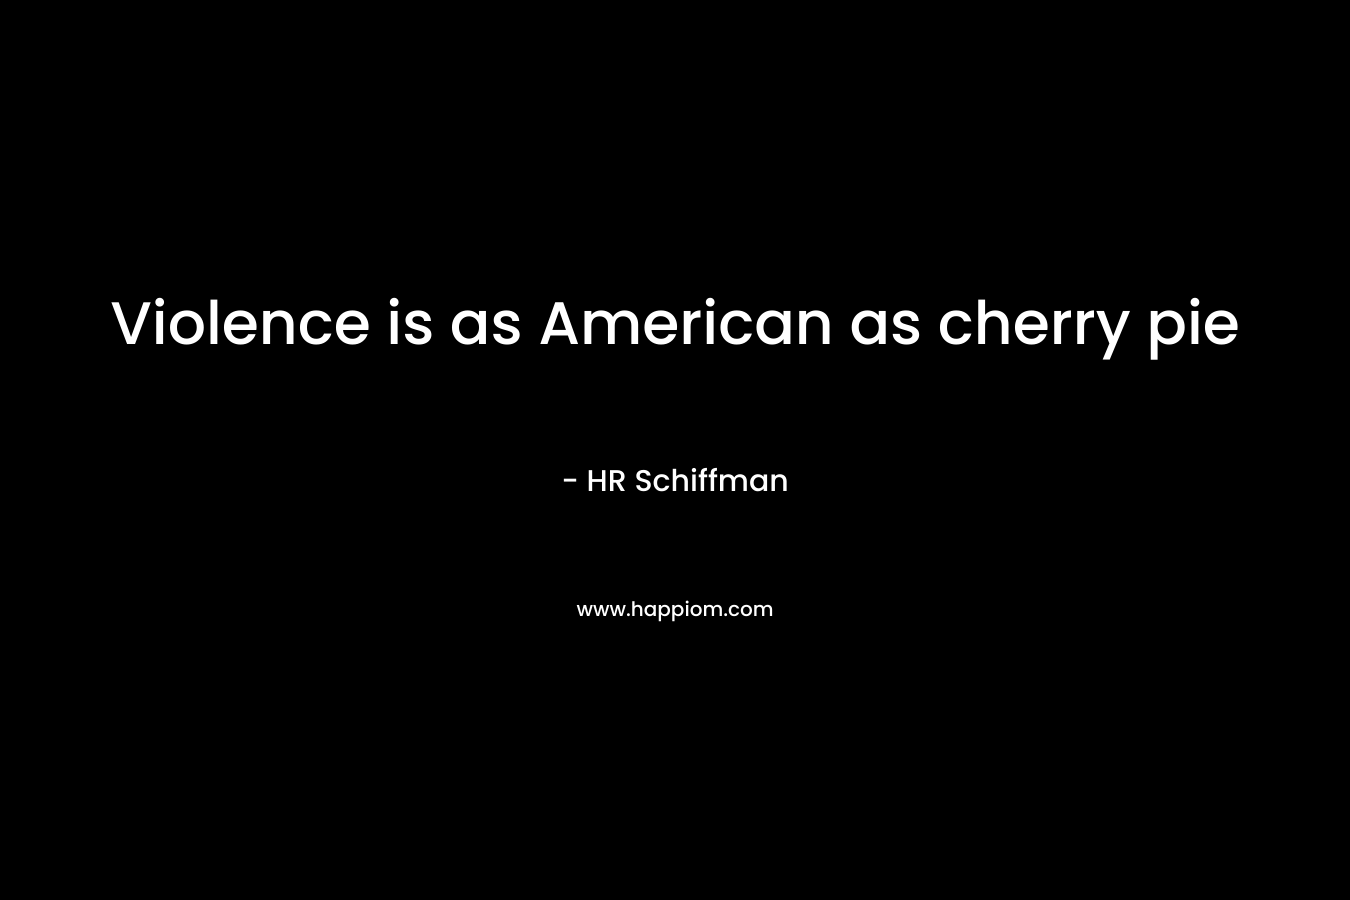 Violence is as American as cherry pie – HR Schiffman